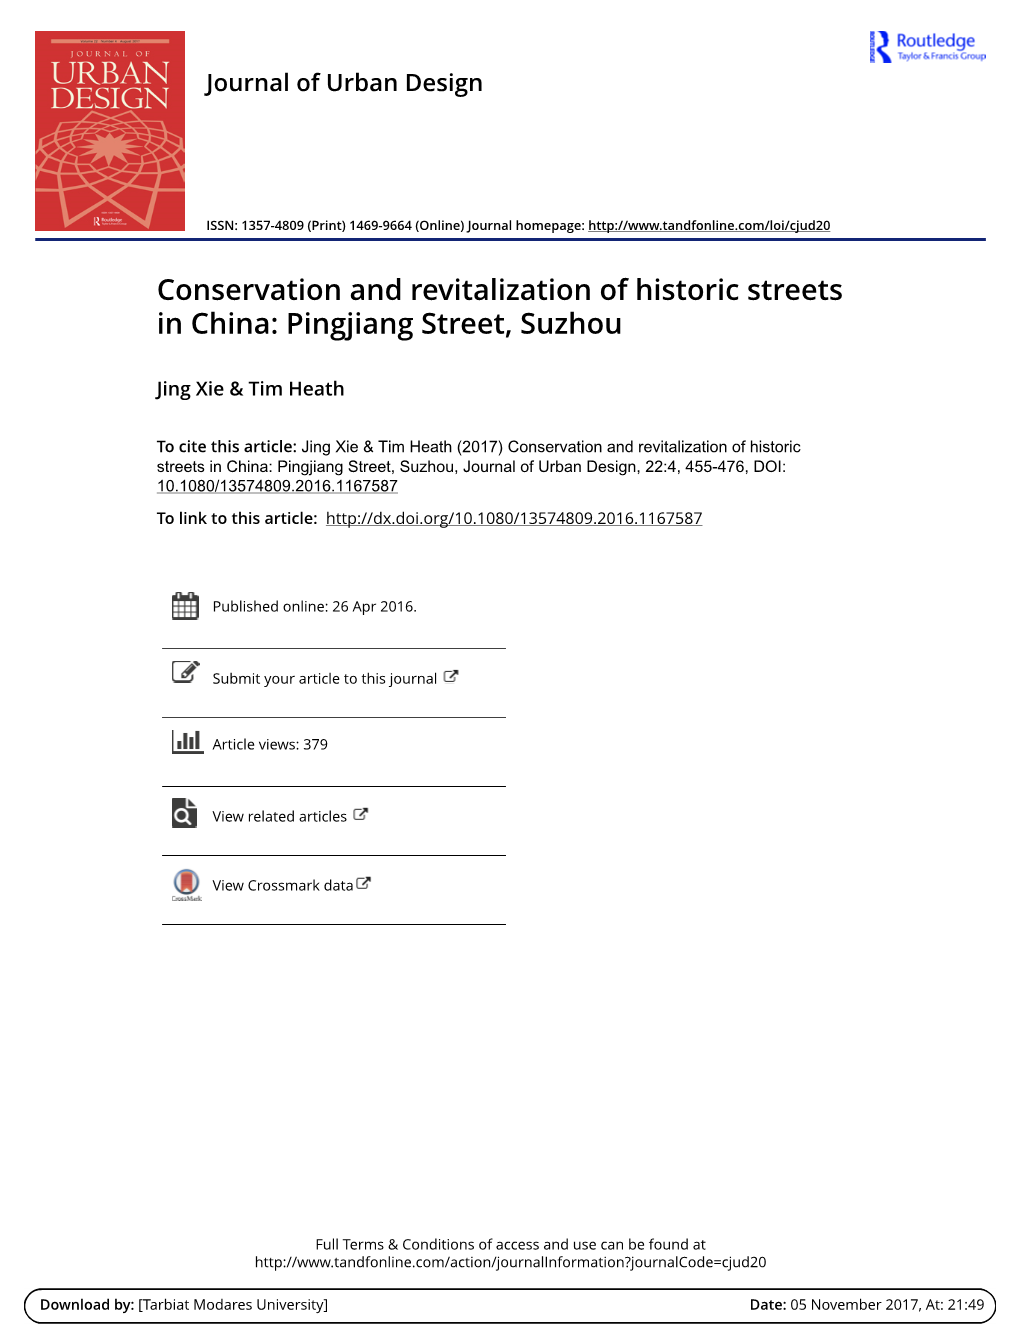 Conservation and Revitalization of Historic Streets in China: Pingjiang Street, Suzhou